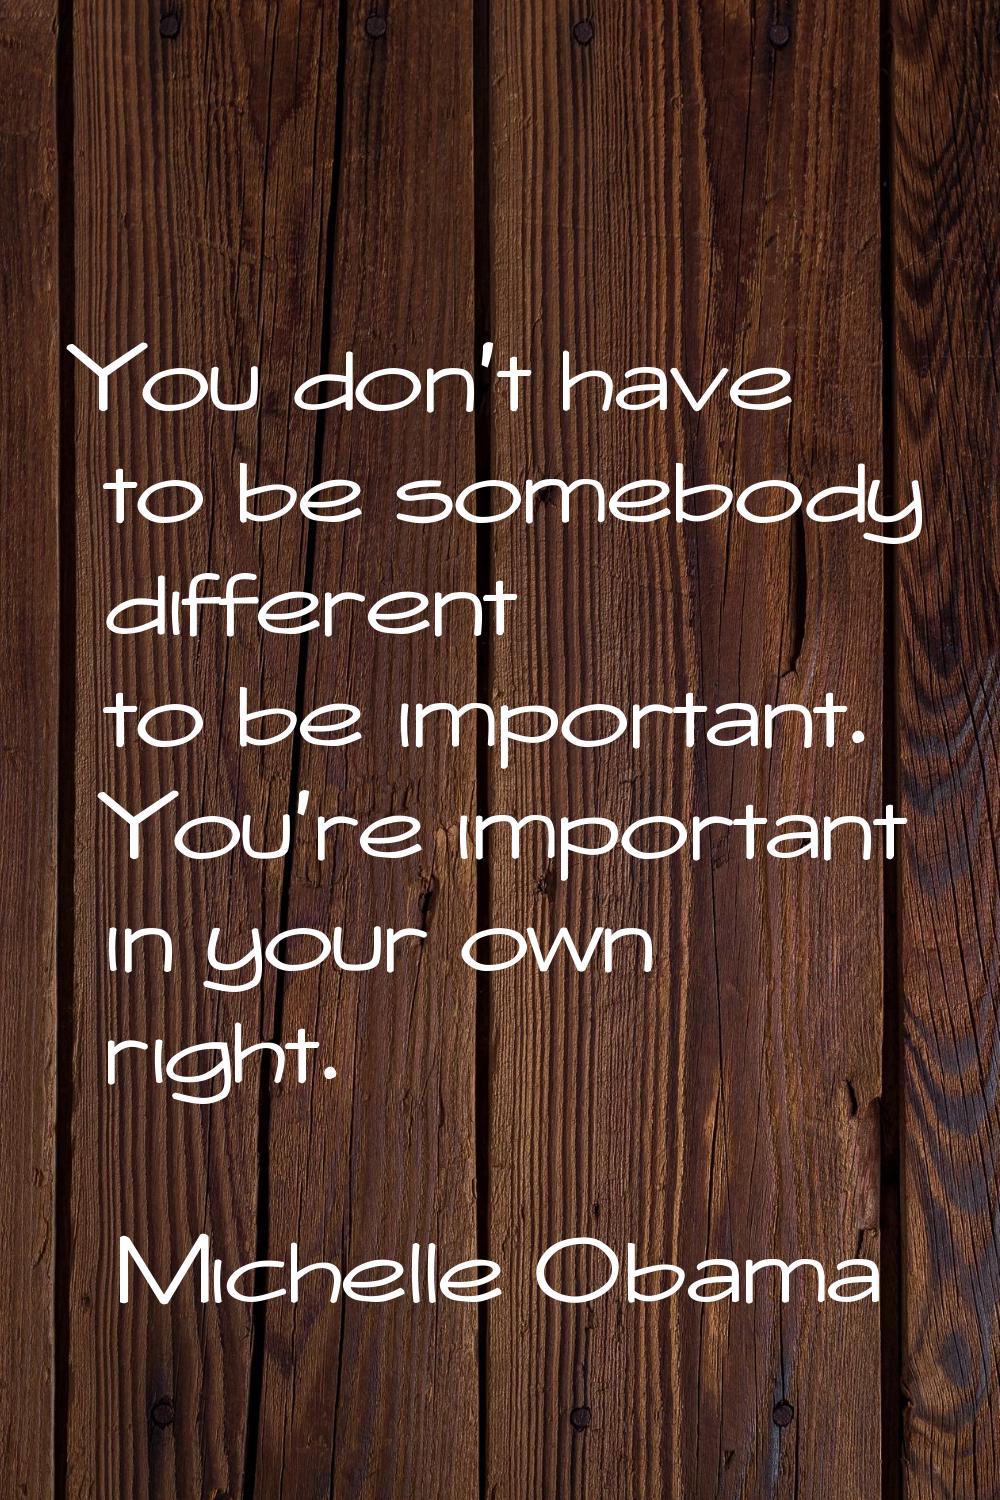 You don't have to be somebody different to be important. You're important in your own right.